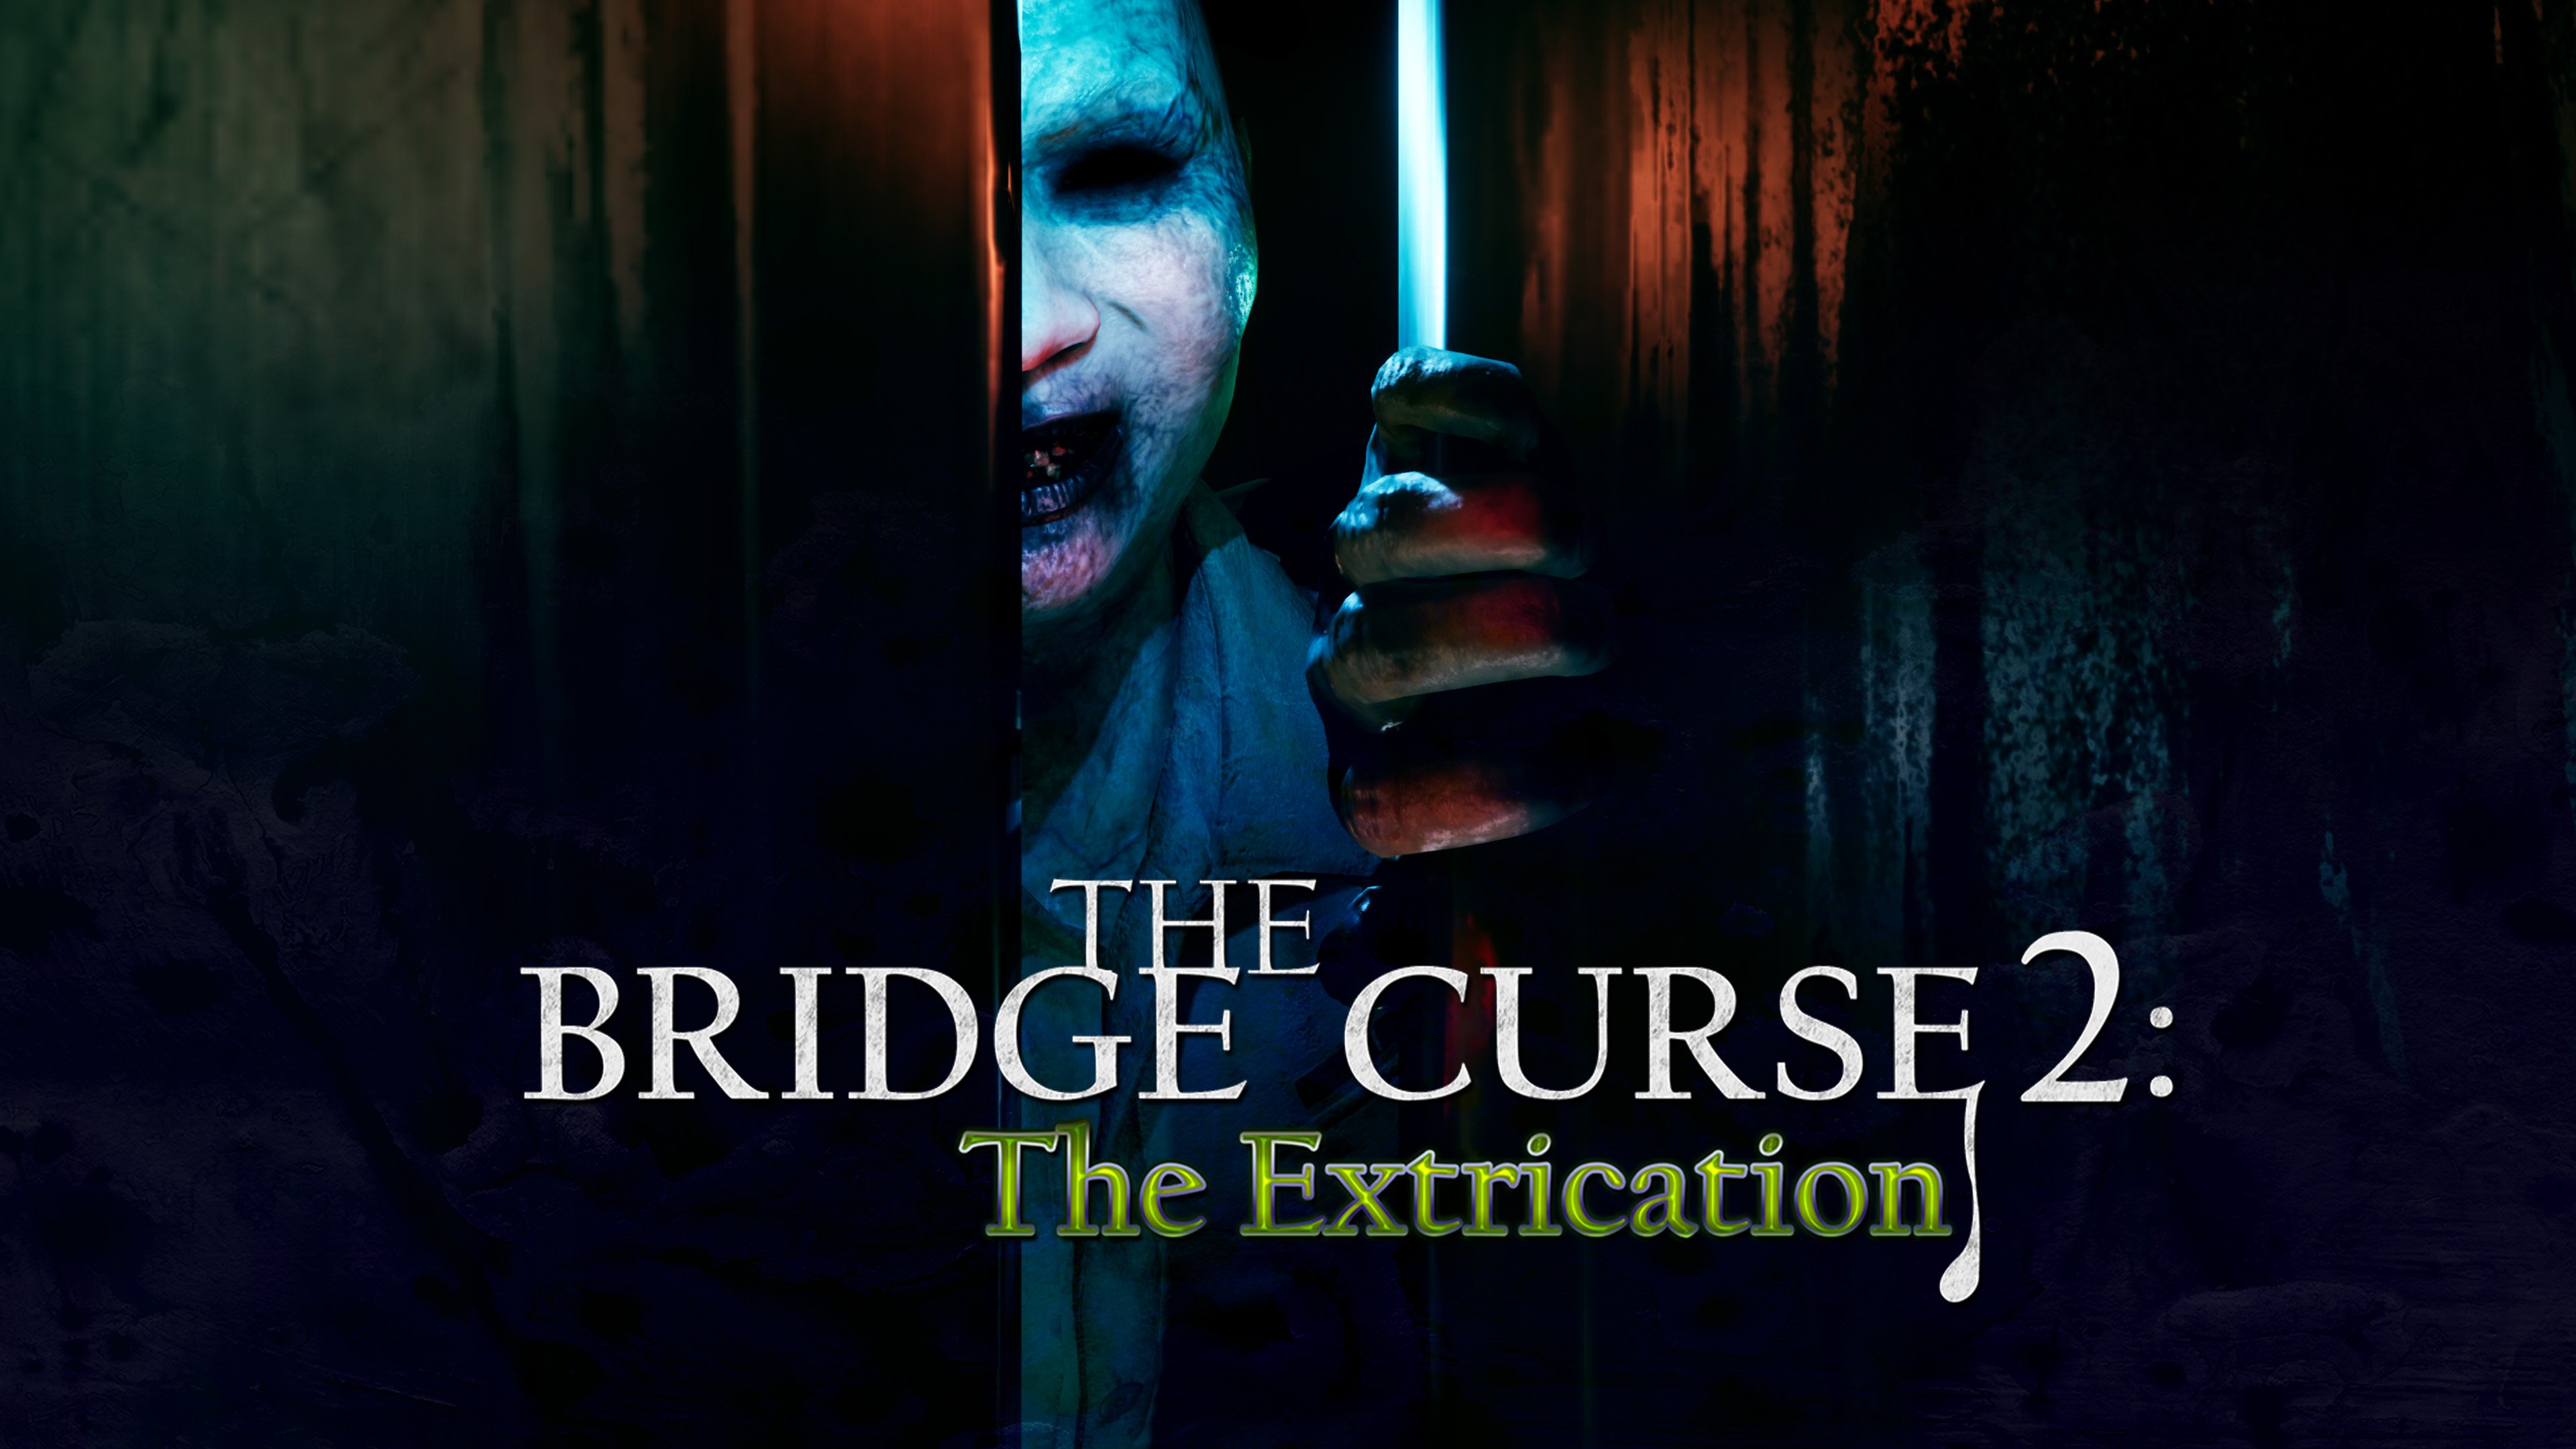 #
      The Bridge Curse 2: The Extrication to be published by PQube in the west